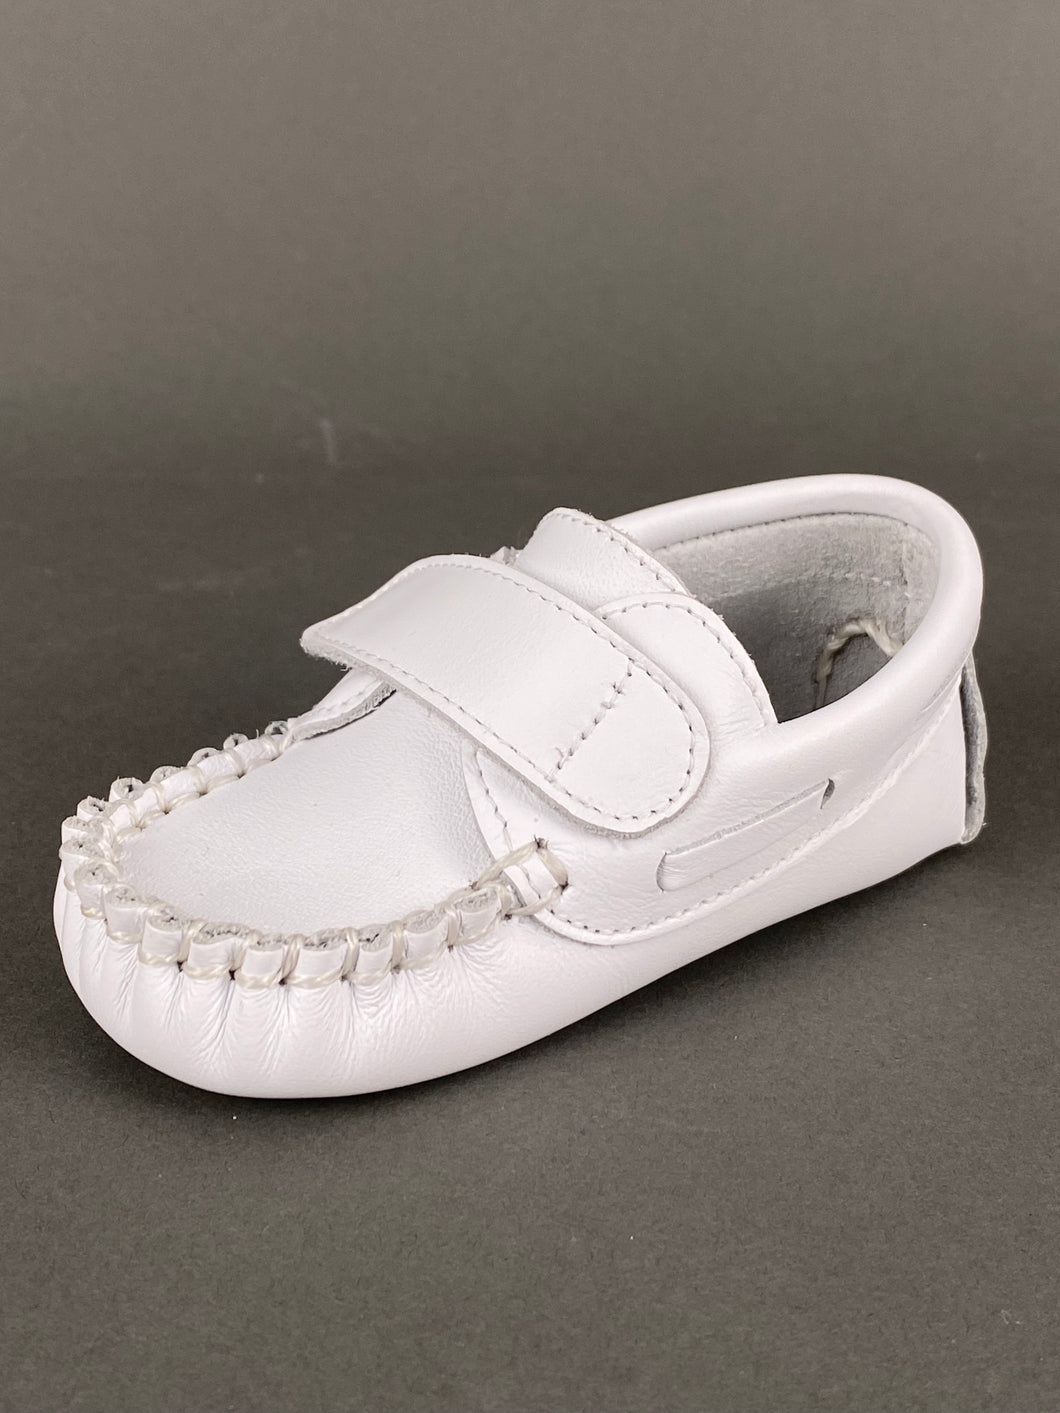 White Leather Moccasin Crib Shoe with Leather Strap